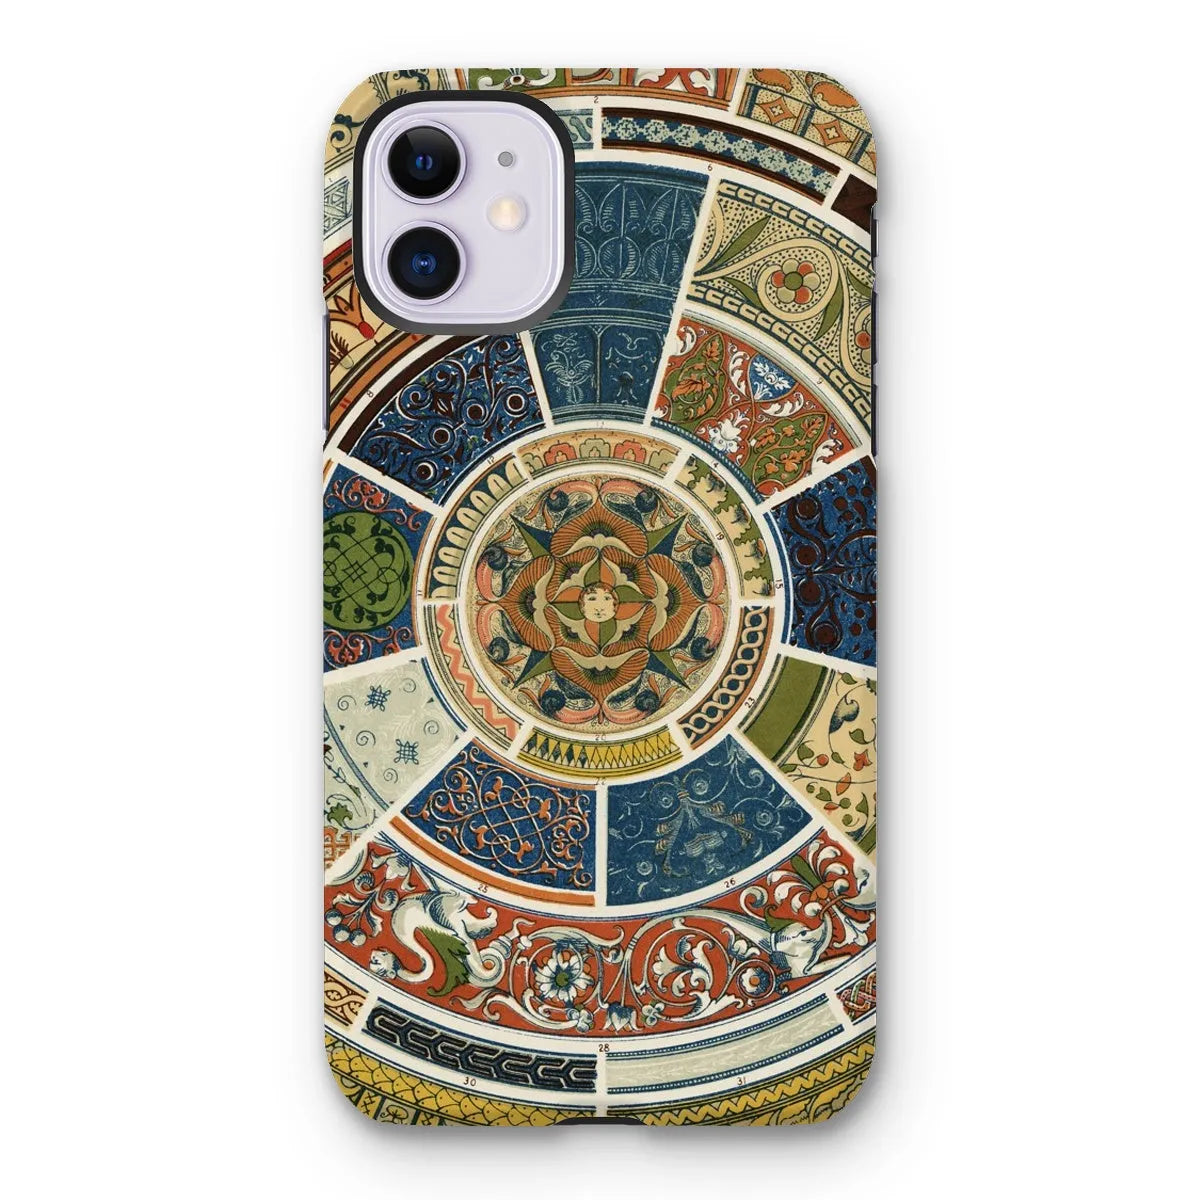 Another Grammar Of Ornament Aesthetic Pattern Art Phone Case - Iphone 11 / Matte - Mobile Phone Cases - Aesthetic Art